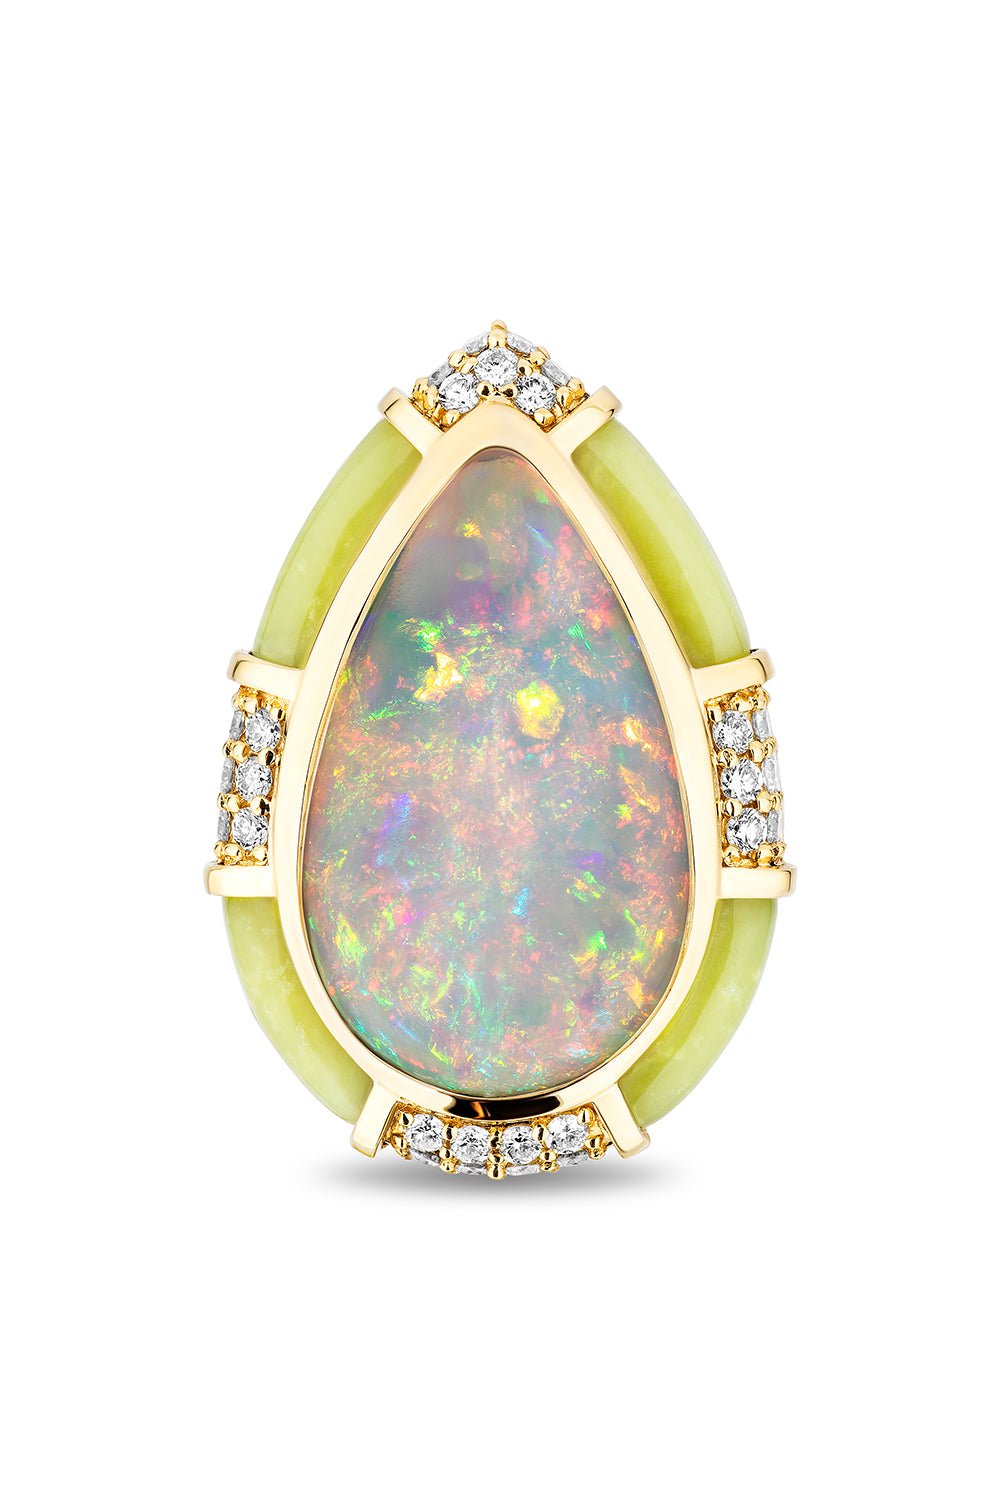 MASON & BOOKS-Opal Sugar And Spice Cocktail Ring-YELLOW GOLD